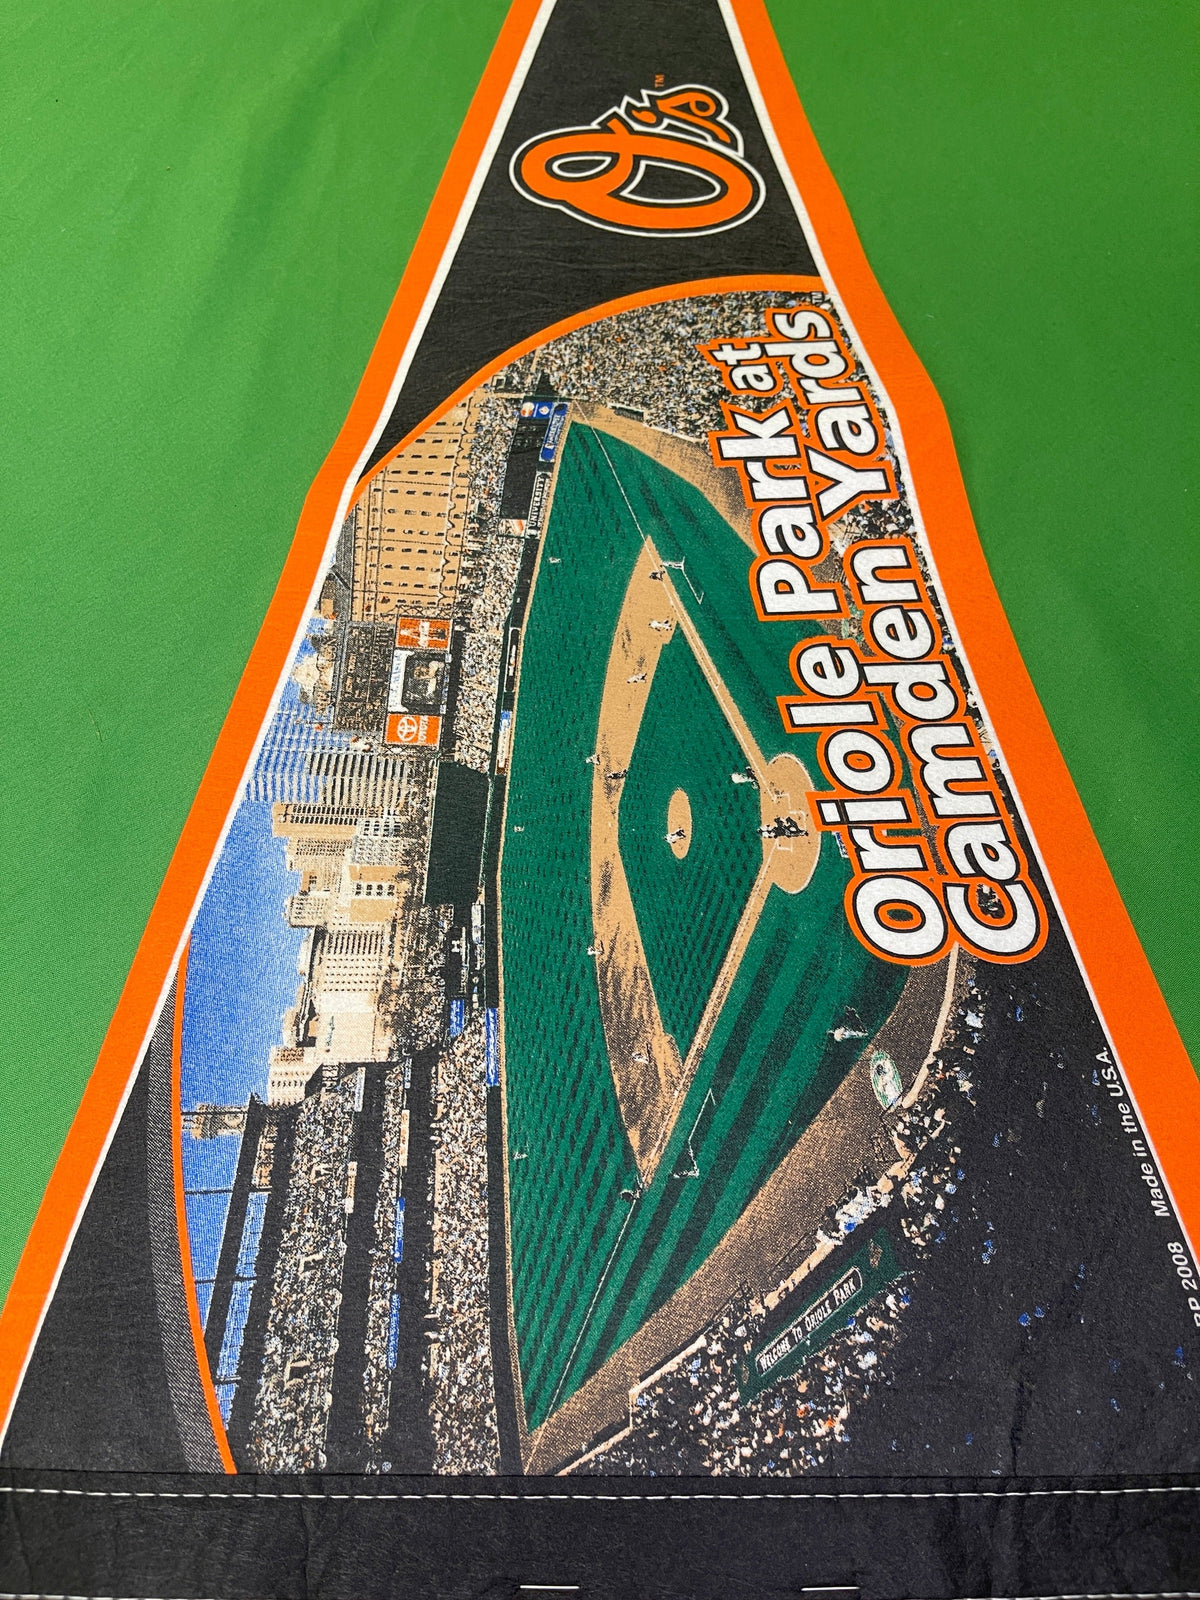 MLB Baltimore Orioles Camden Yards Full-Size Pennant NWT